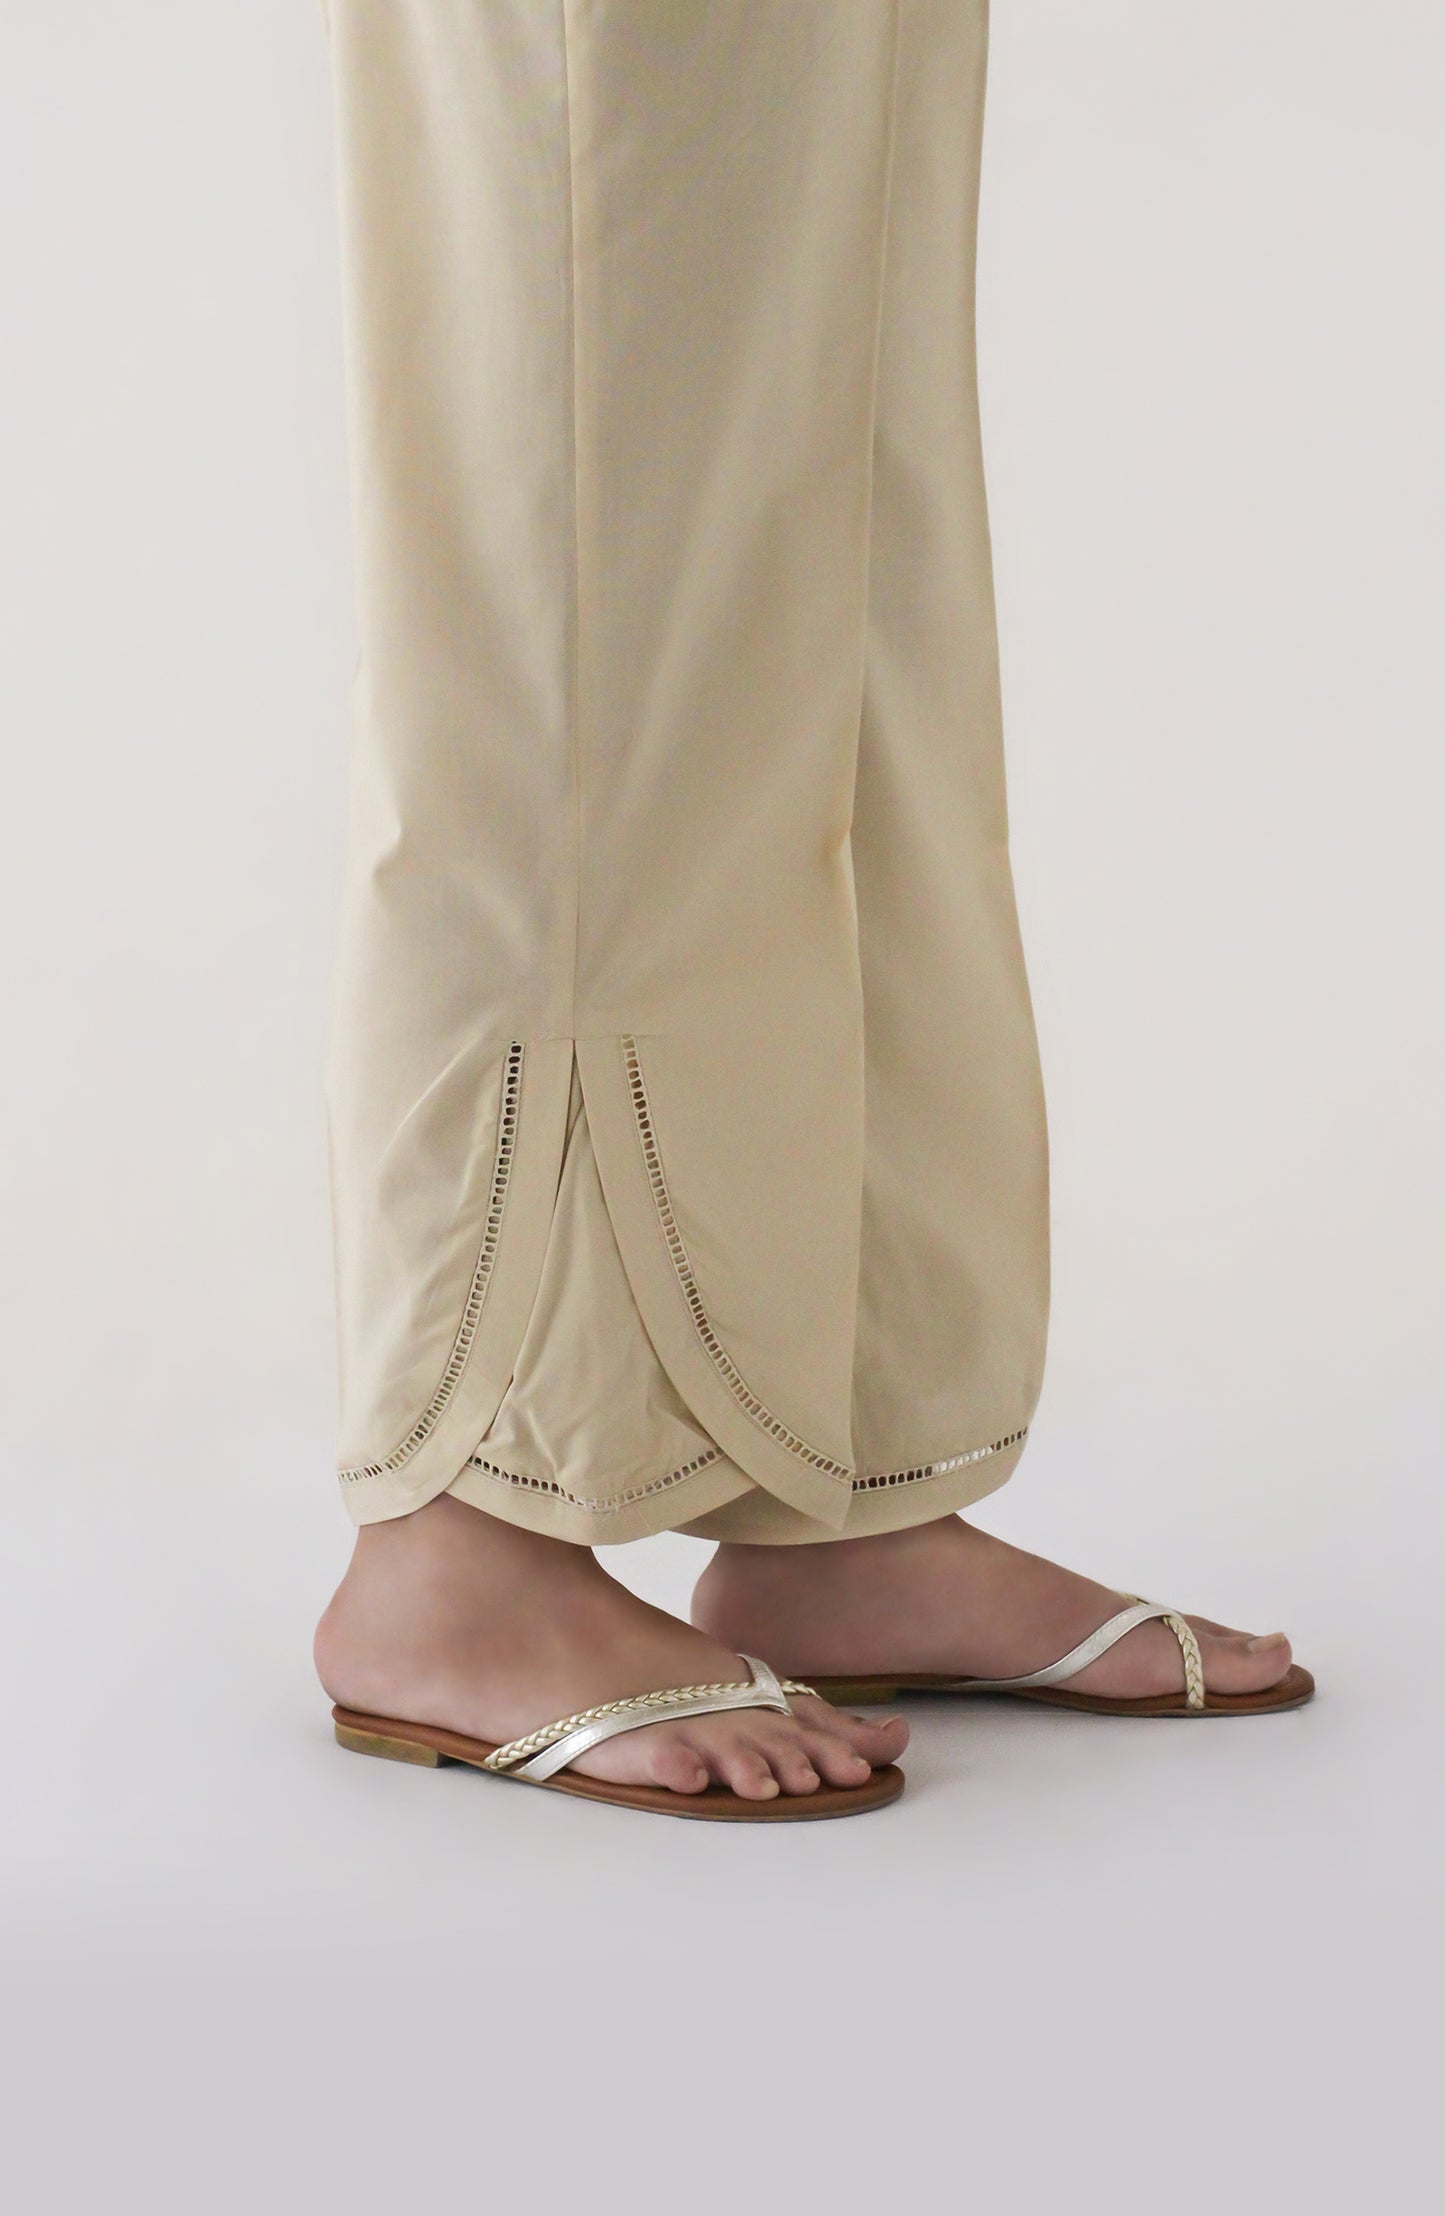 NRP-120/S BEIGE CAMBRIC SCPANTS STITCHED BOTTOMS PANTS